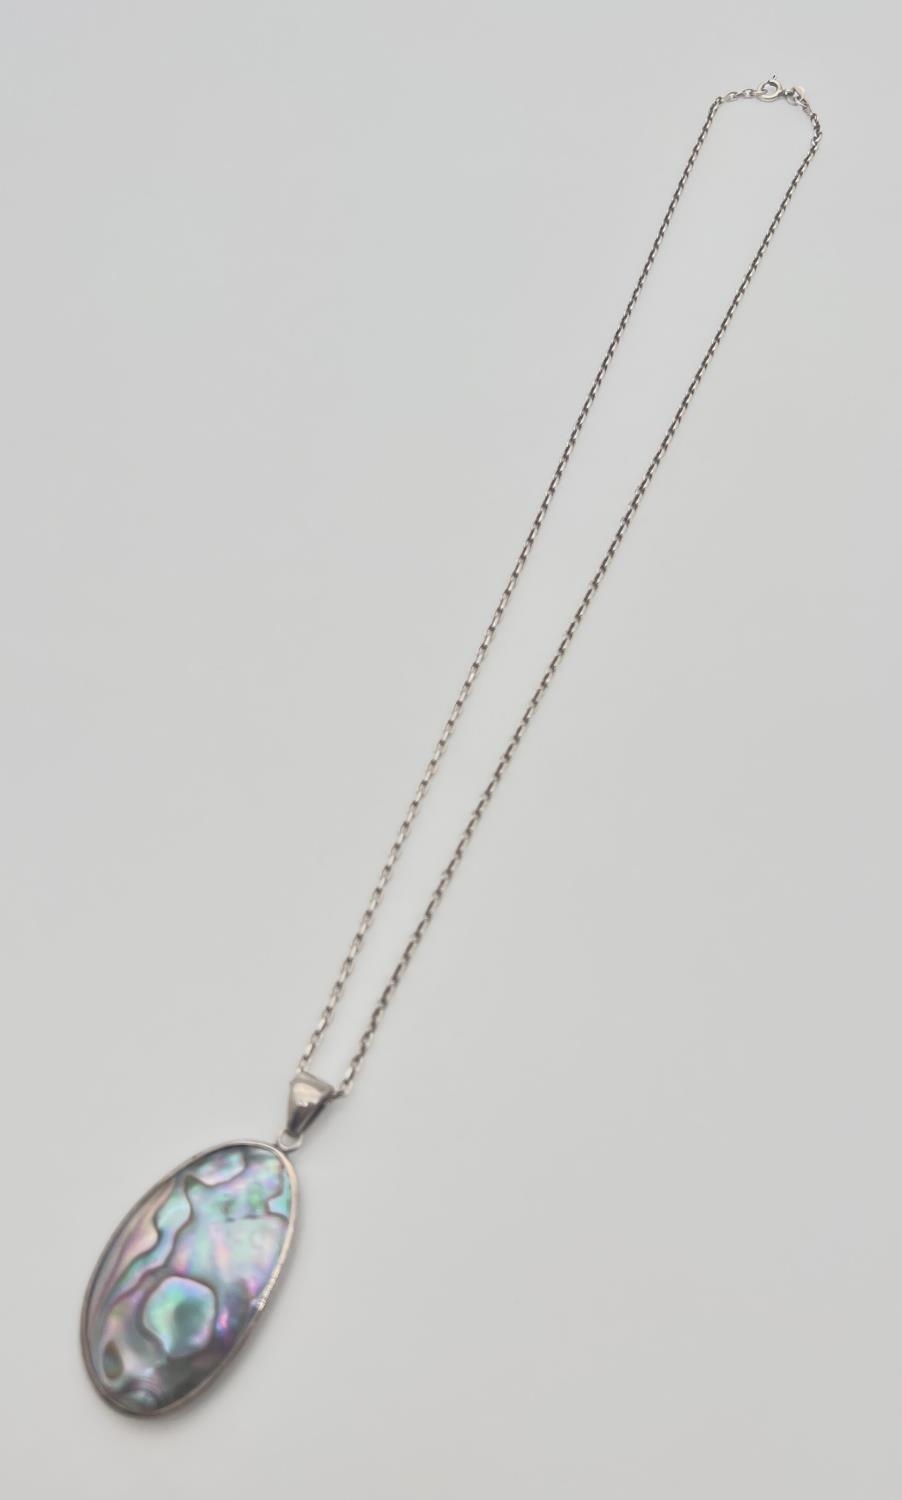 An oval shaped Abalone shell pendant set in silver, on a 20" belcher chain with spring ring clasp. - Image 2 of 3